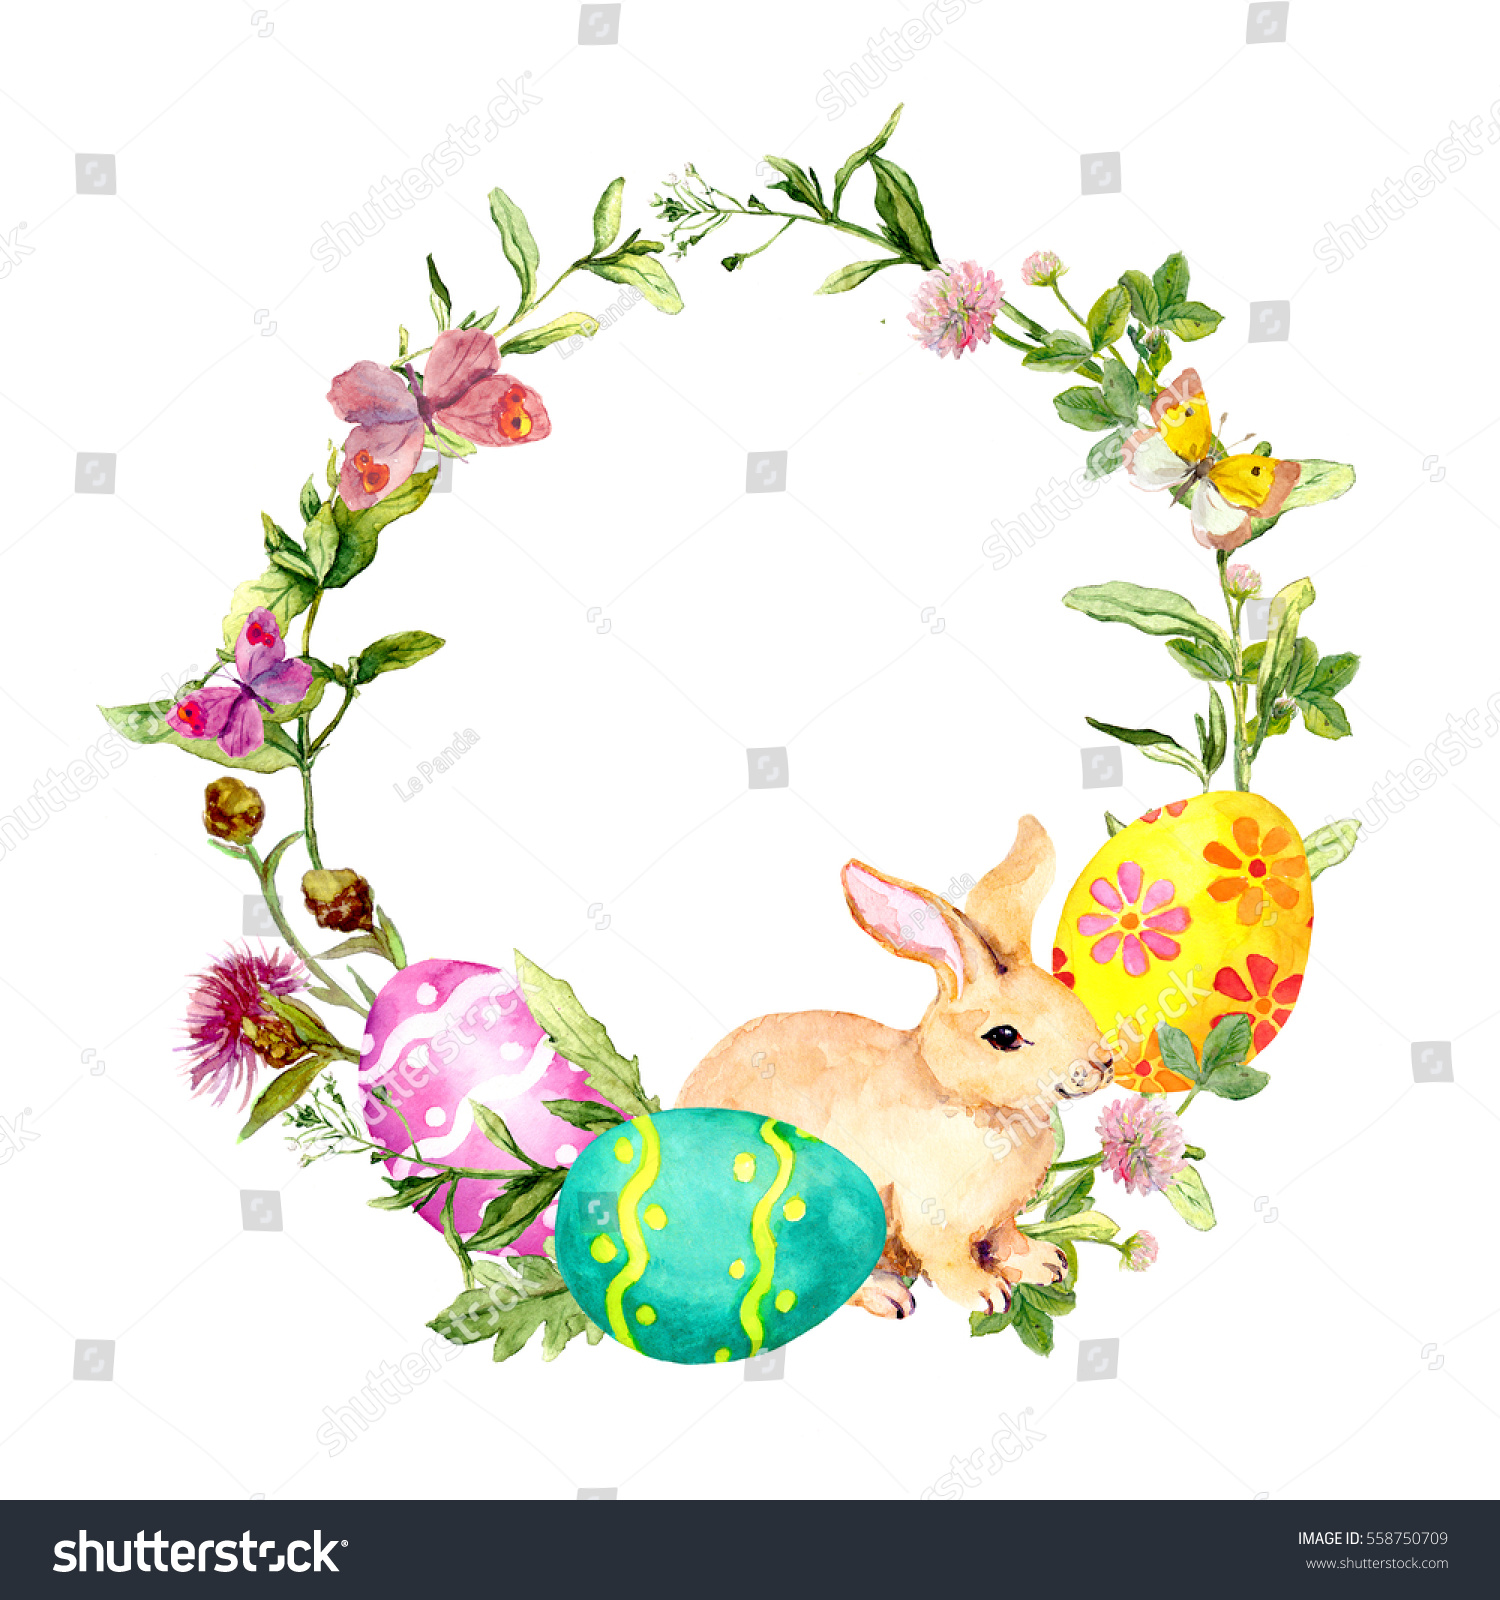 Easter Wreath Easter Bunny Colored Eggs Stock Illustration 558750709